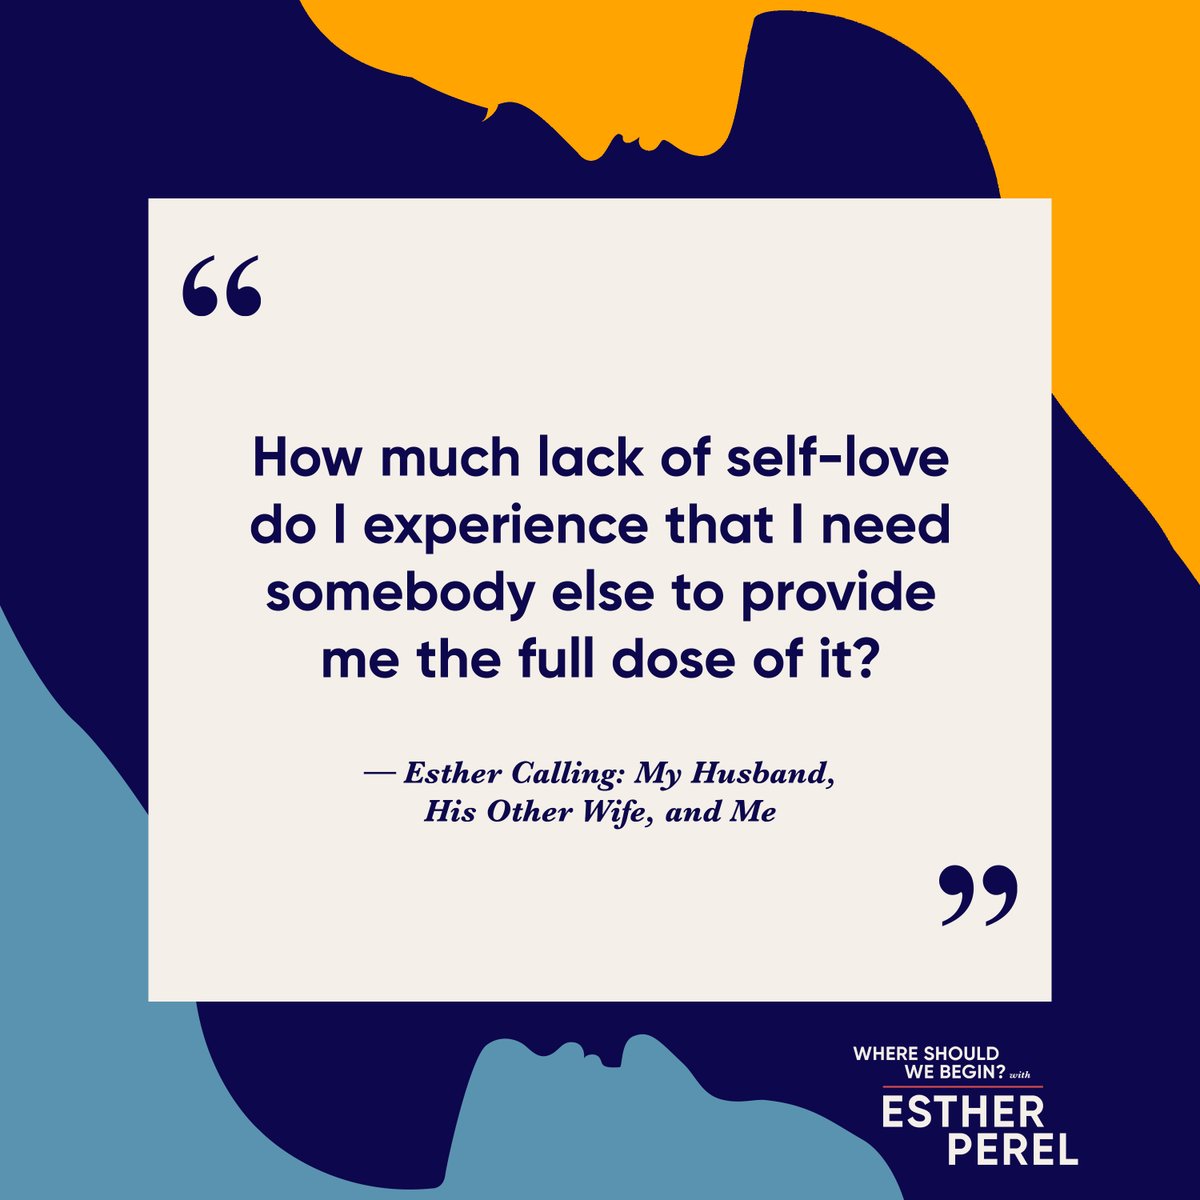 In a new Esther Calling episode of Where Should We Begin? titled 'My Husband, His Other Wife, and Me', a woman shares her journey of love and sacrifice. Listen through the link below as I help her untangle the complex web of duty, love, and self-worth.…